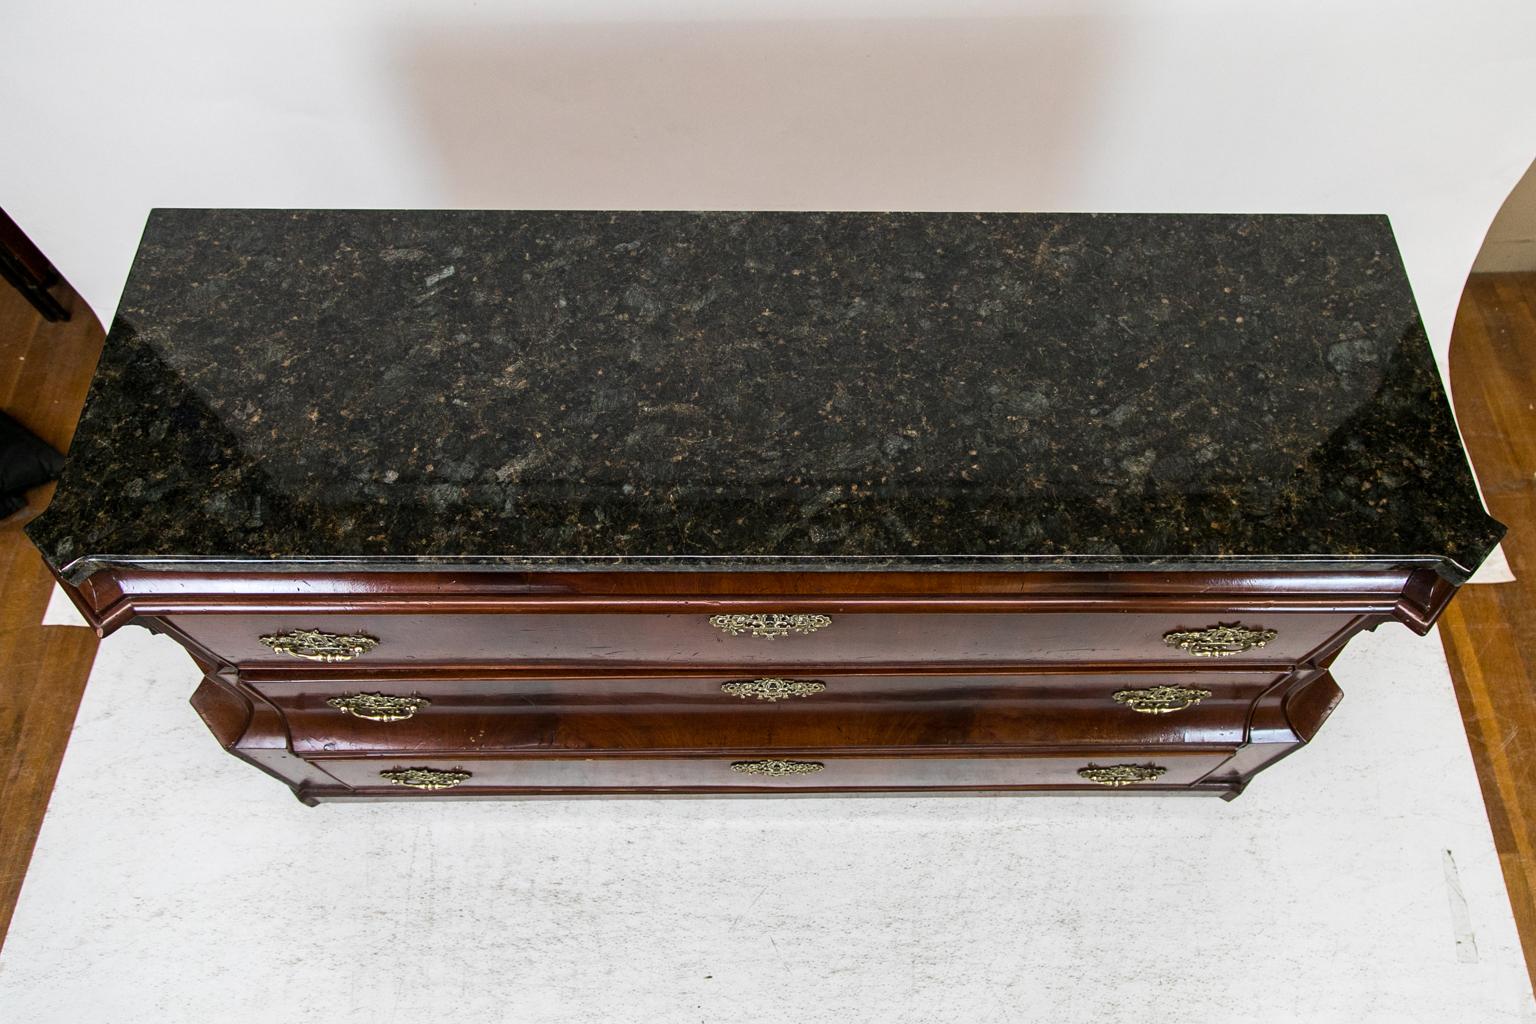 This three-drawer granite top chest has a dark stone top, which is later. There are elaborate handles which were individually hand cast but are not original. The top frieze is concave. The middle drawer has a concave shape above a straight drawer.